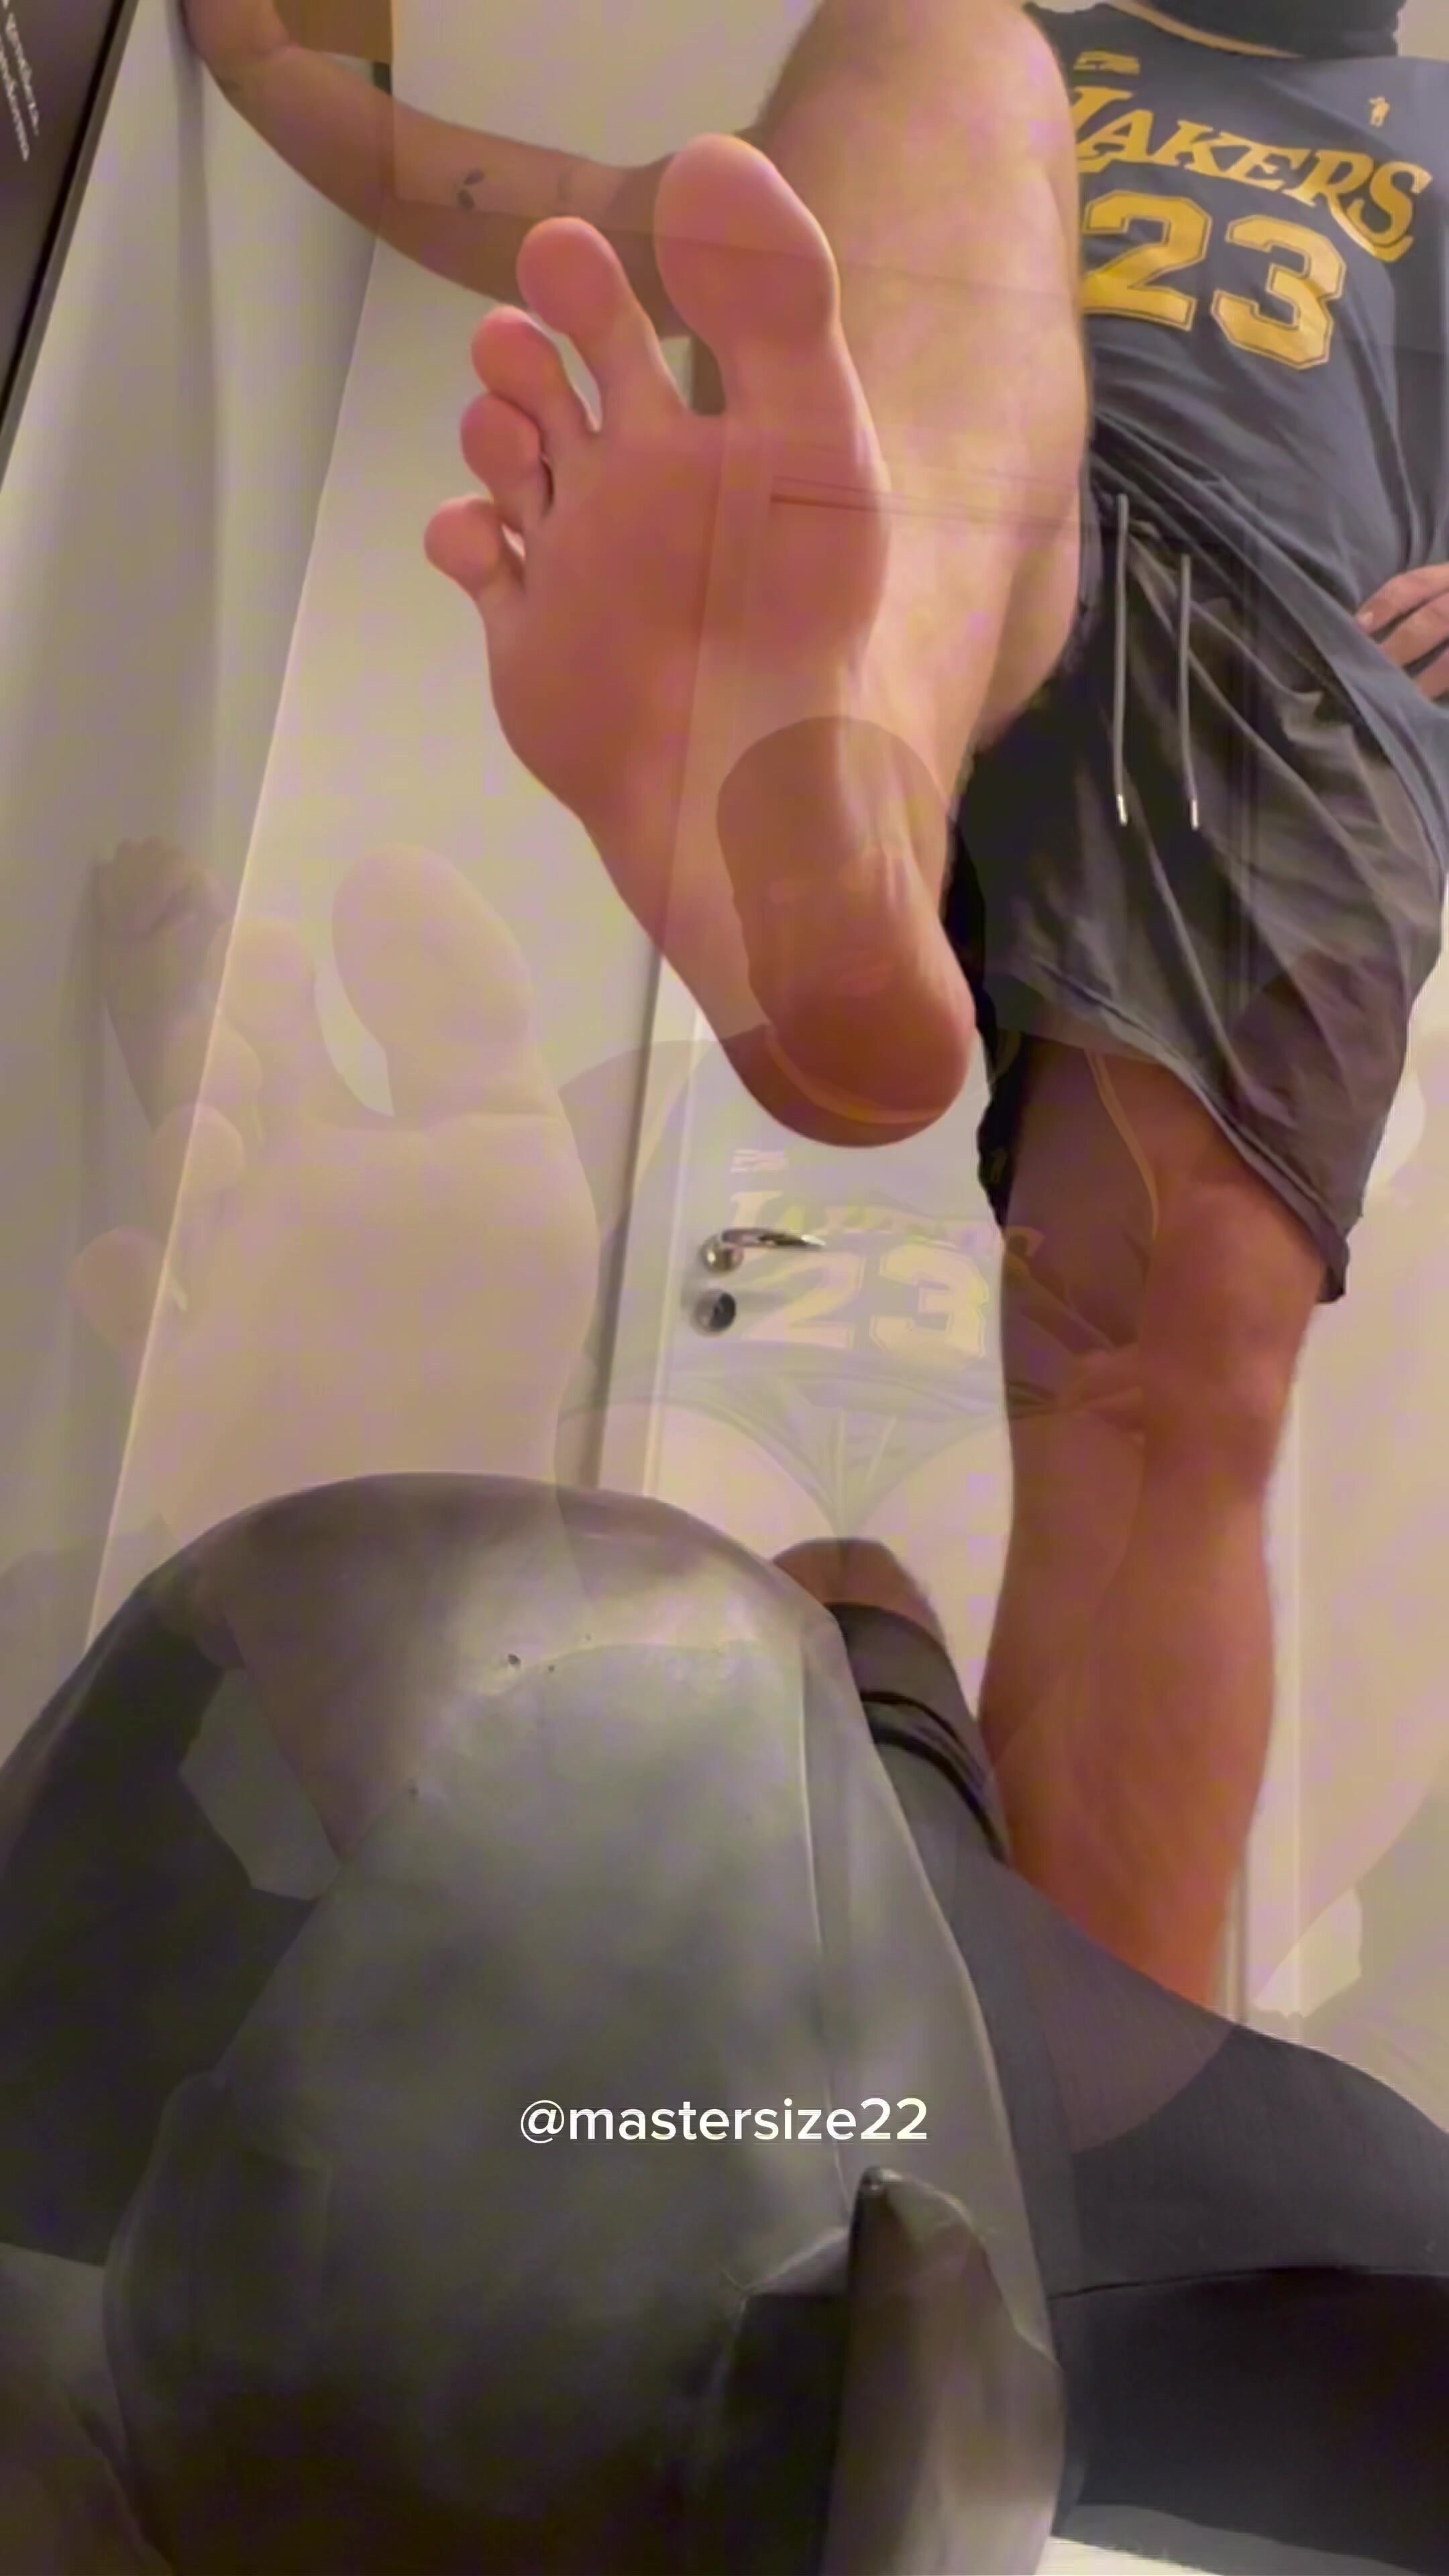 Giant man 7’2ft tall and feet size 22us - video 3